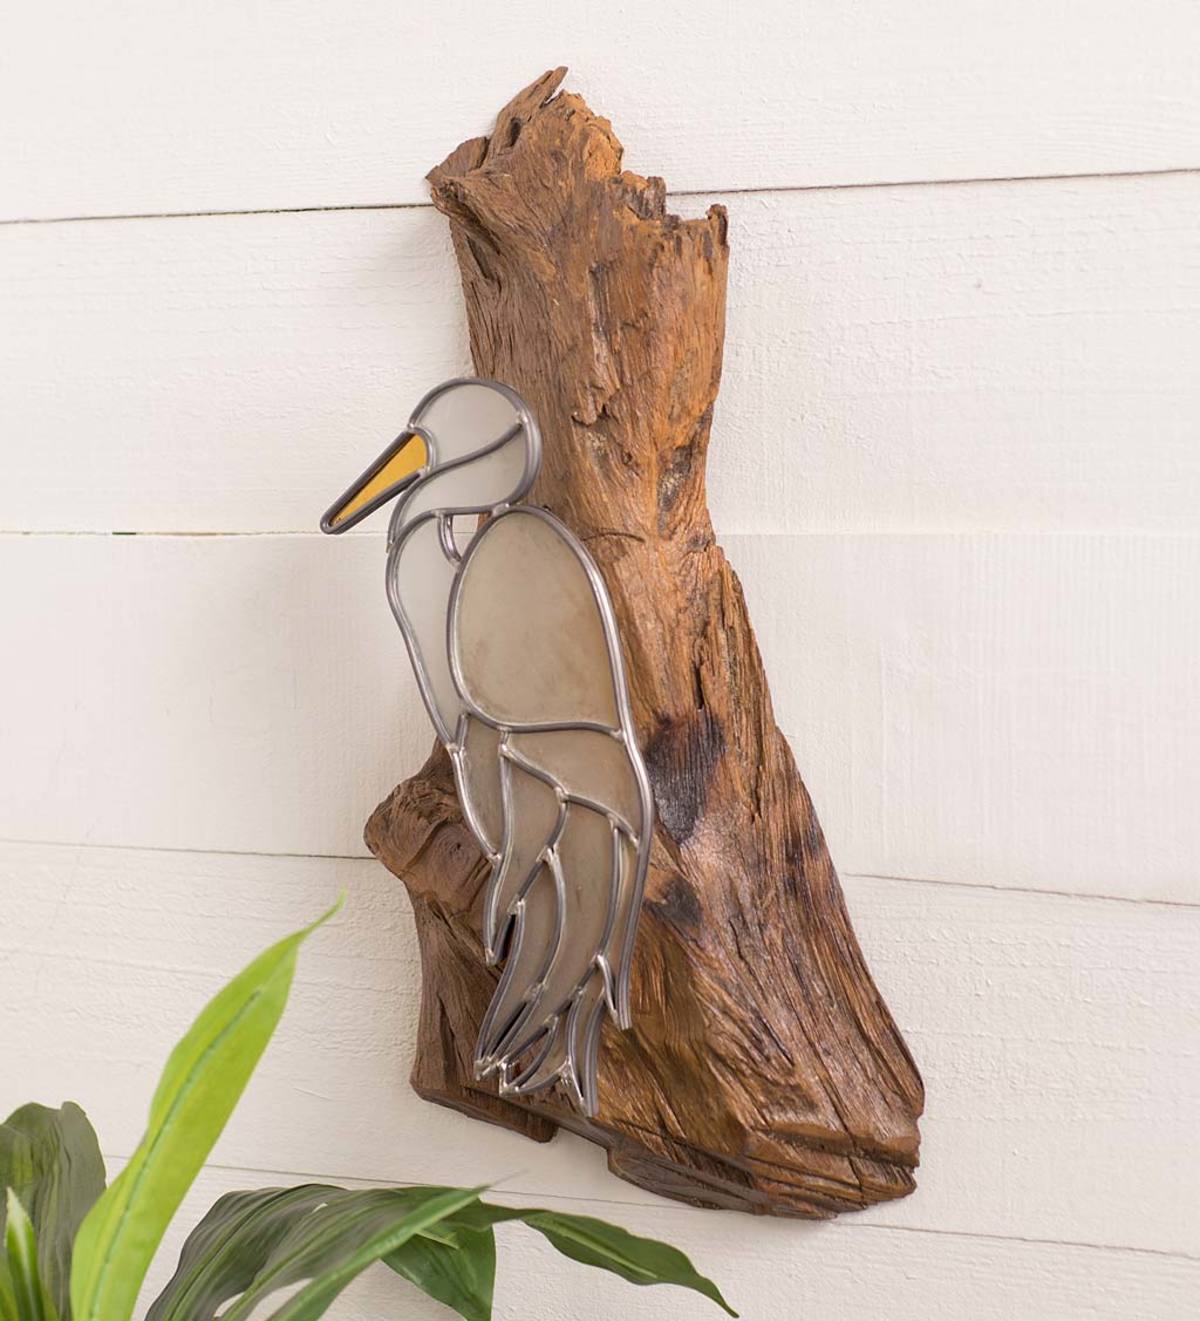 Stained Glass Crane on Teak Wood Wall Art